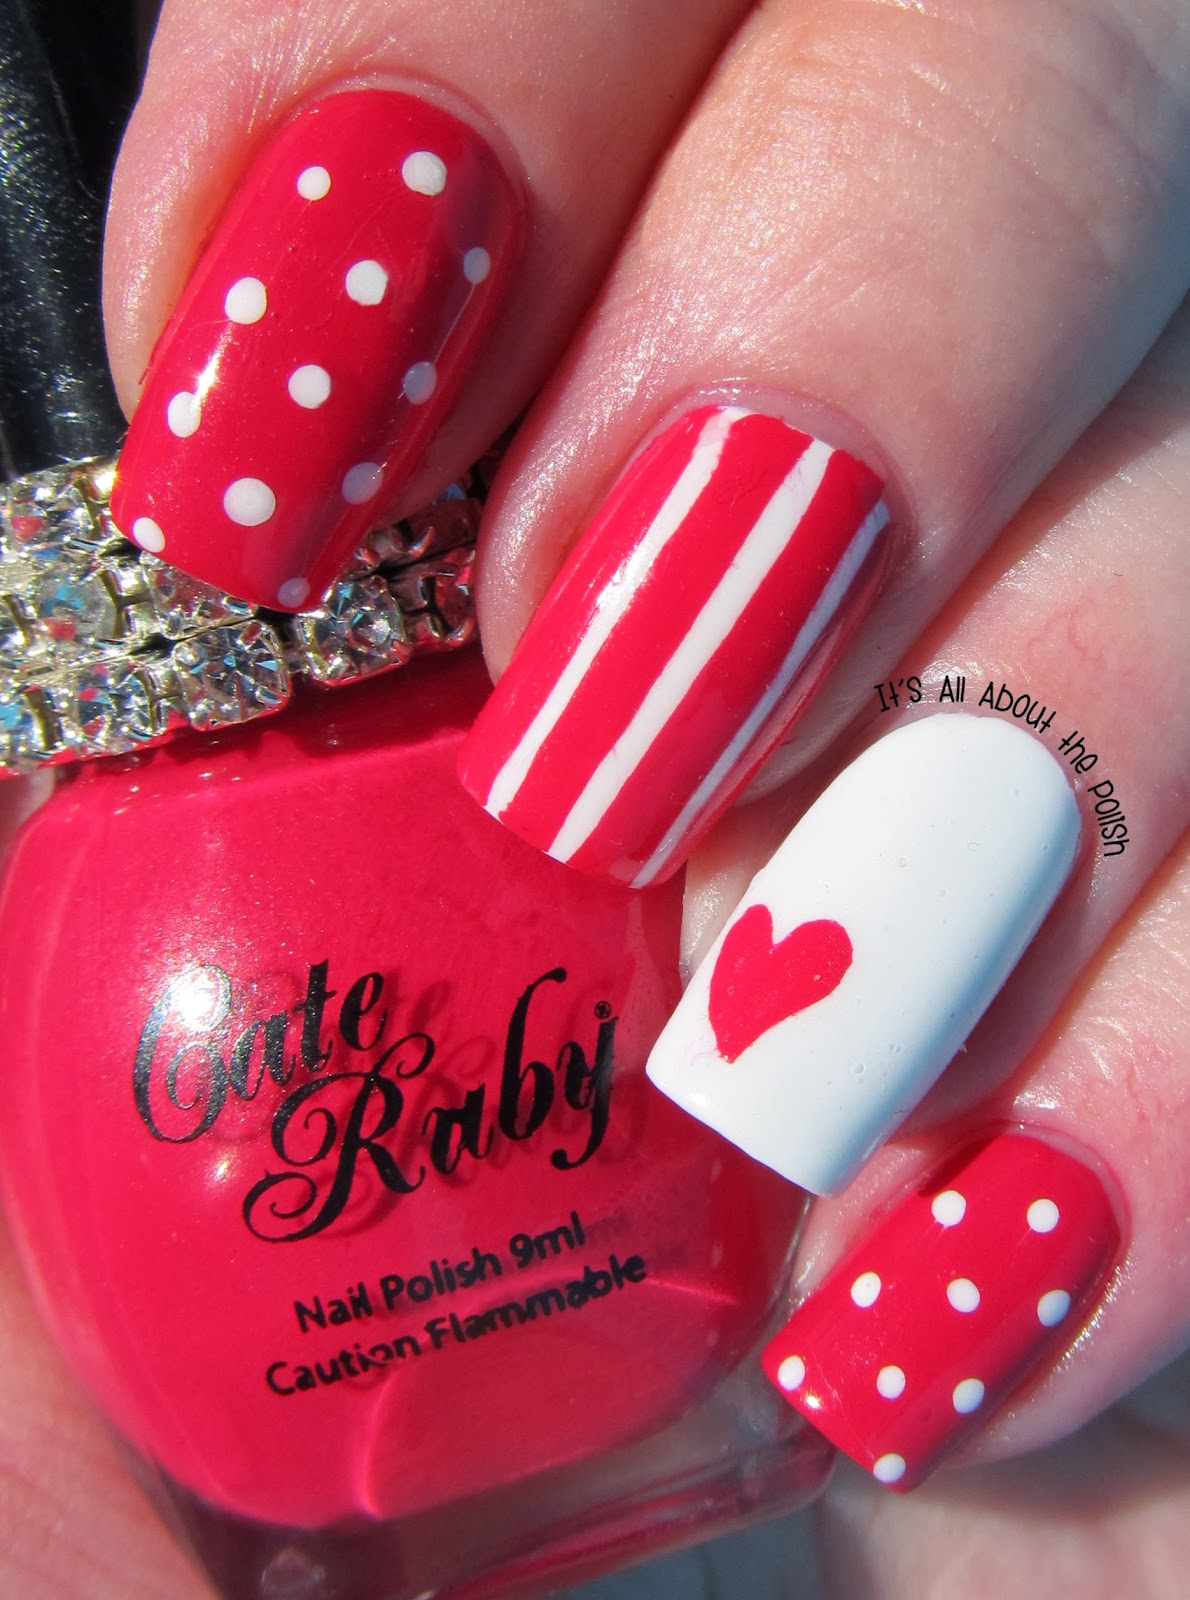 It's all about the polish: Cate Ruby Raspberry Sorbet Valentine's nail art